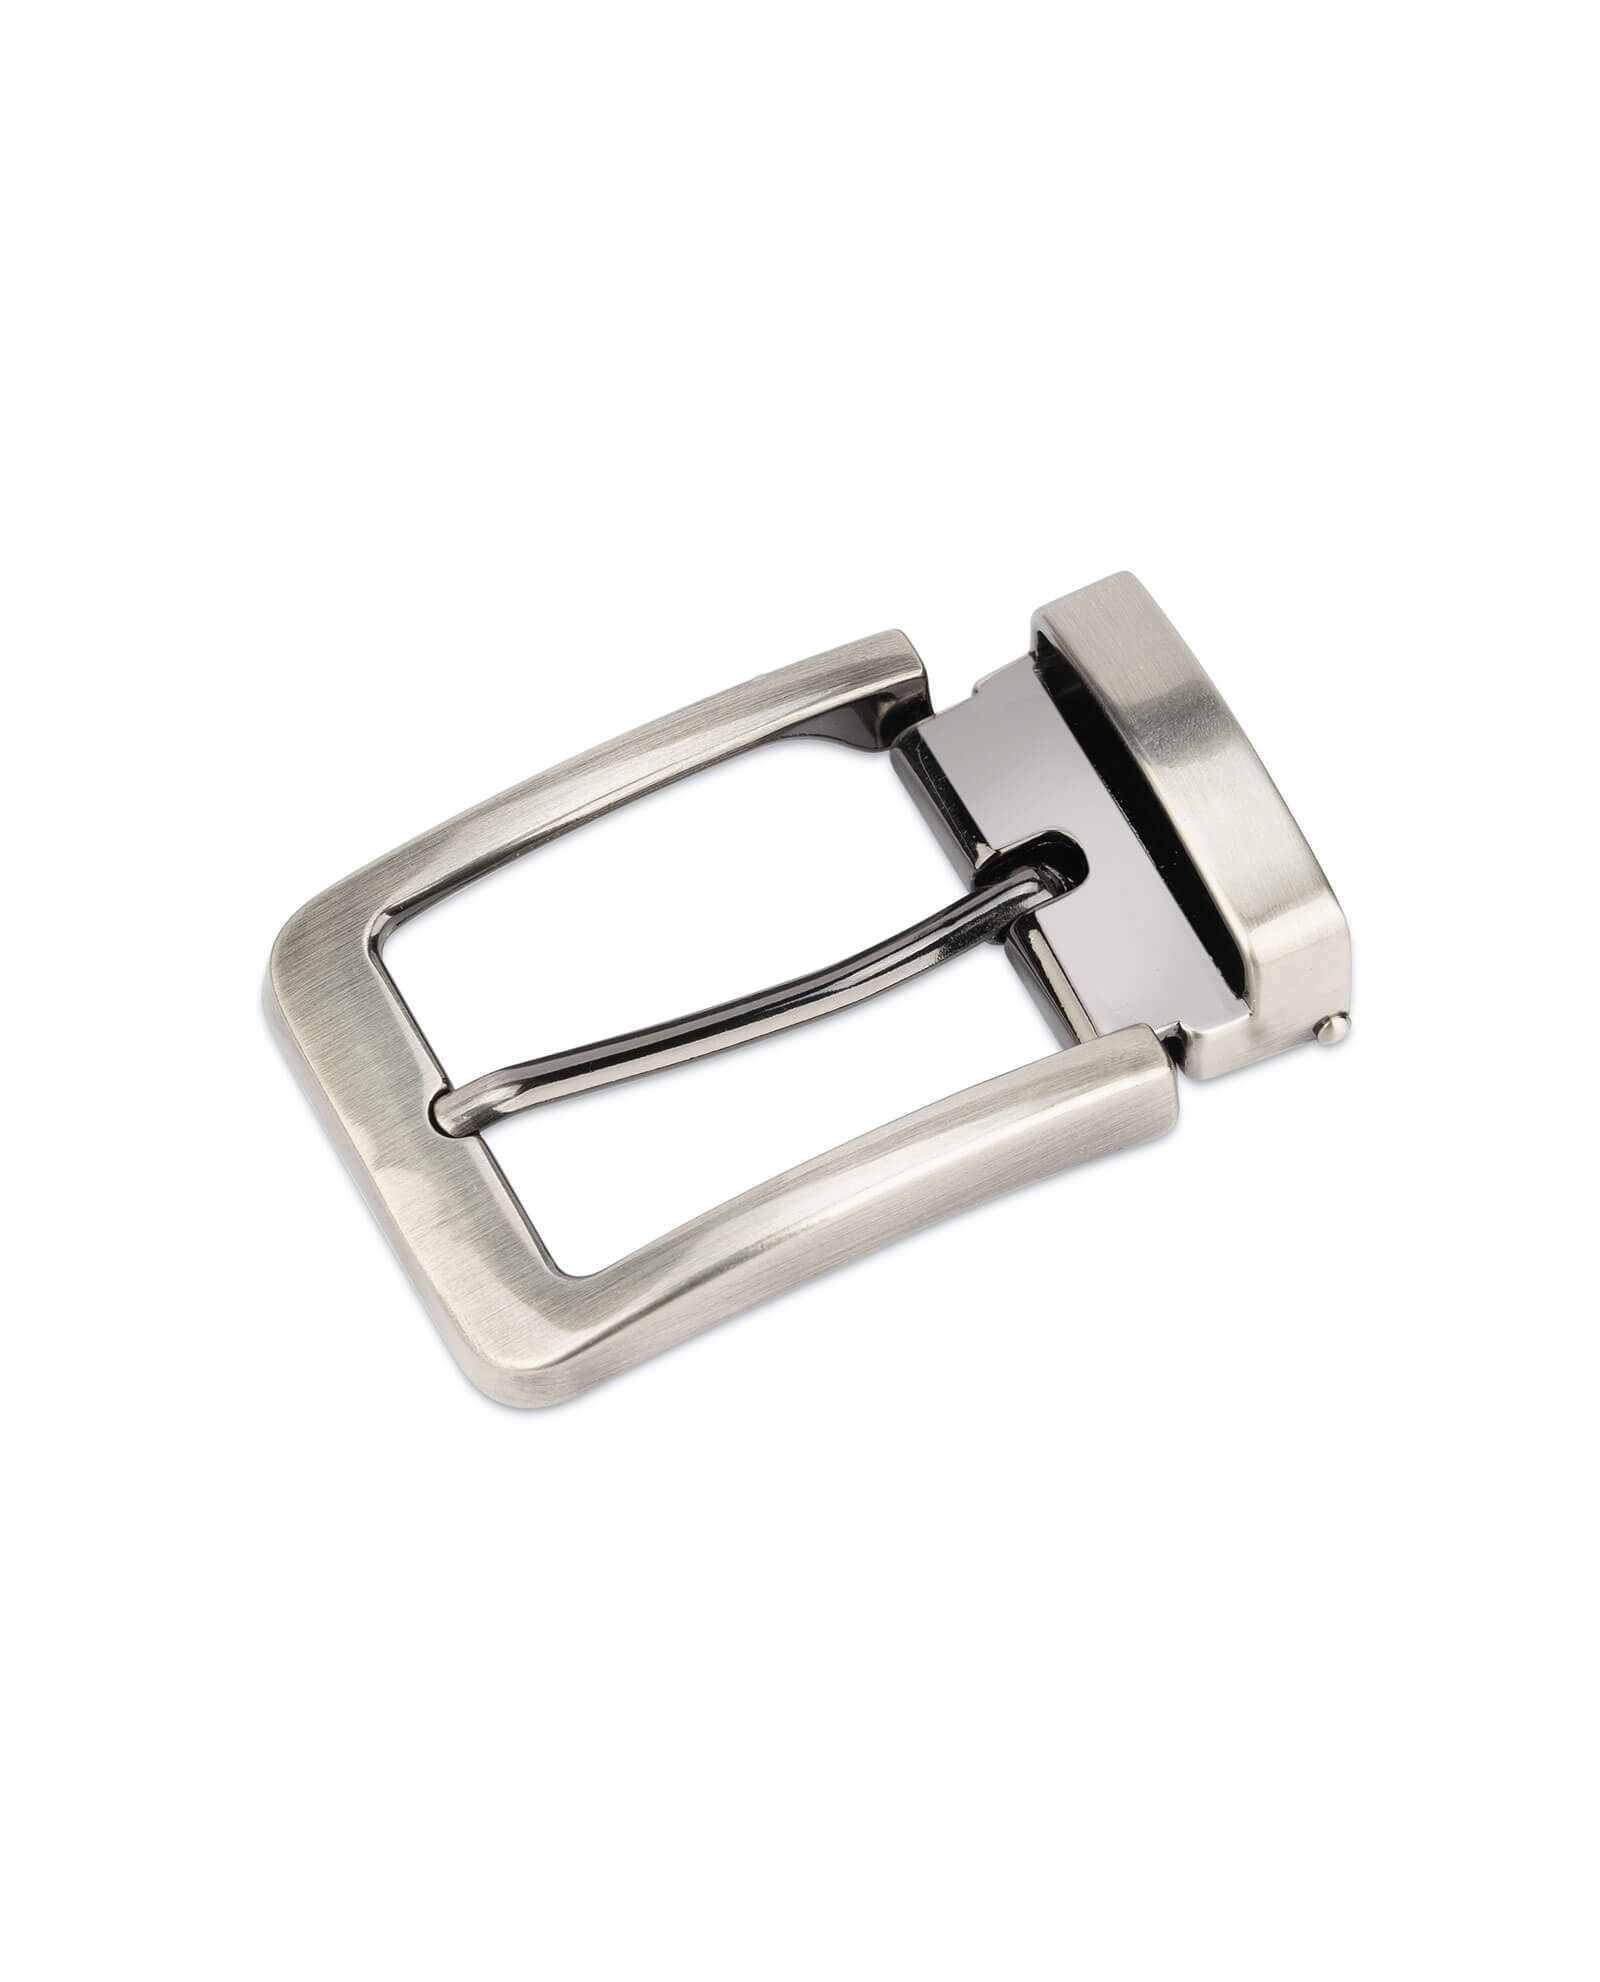 GP Replacement Roller Buckle Classic Casual Metal Belt Buckle fits